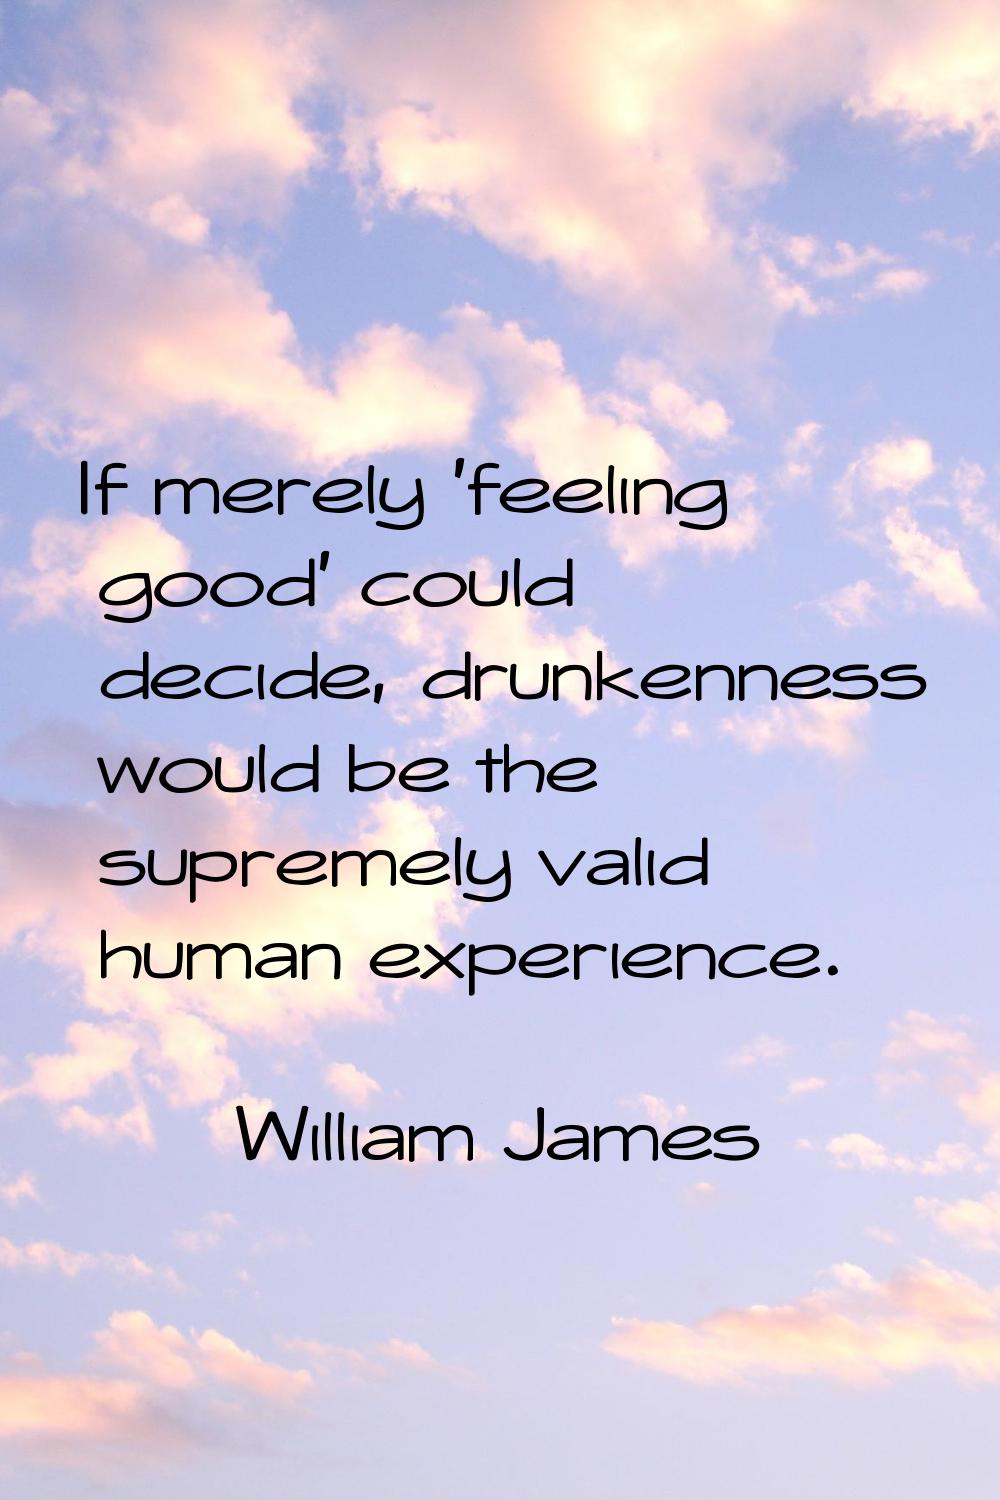 If merely 'feeling good' could decide, drunkenness would be the supremely valid human experience.